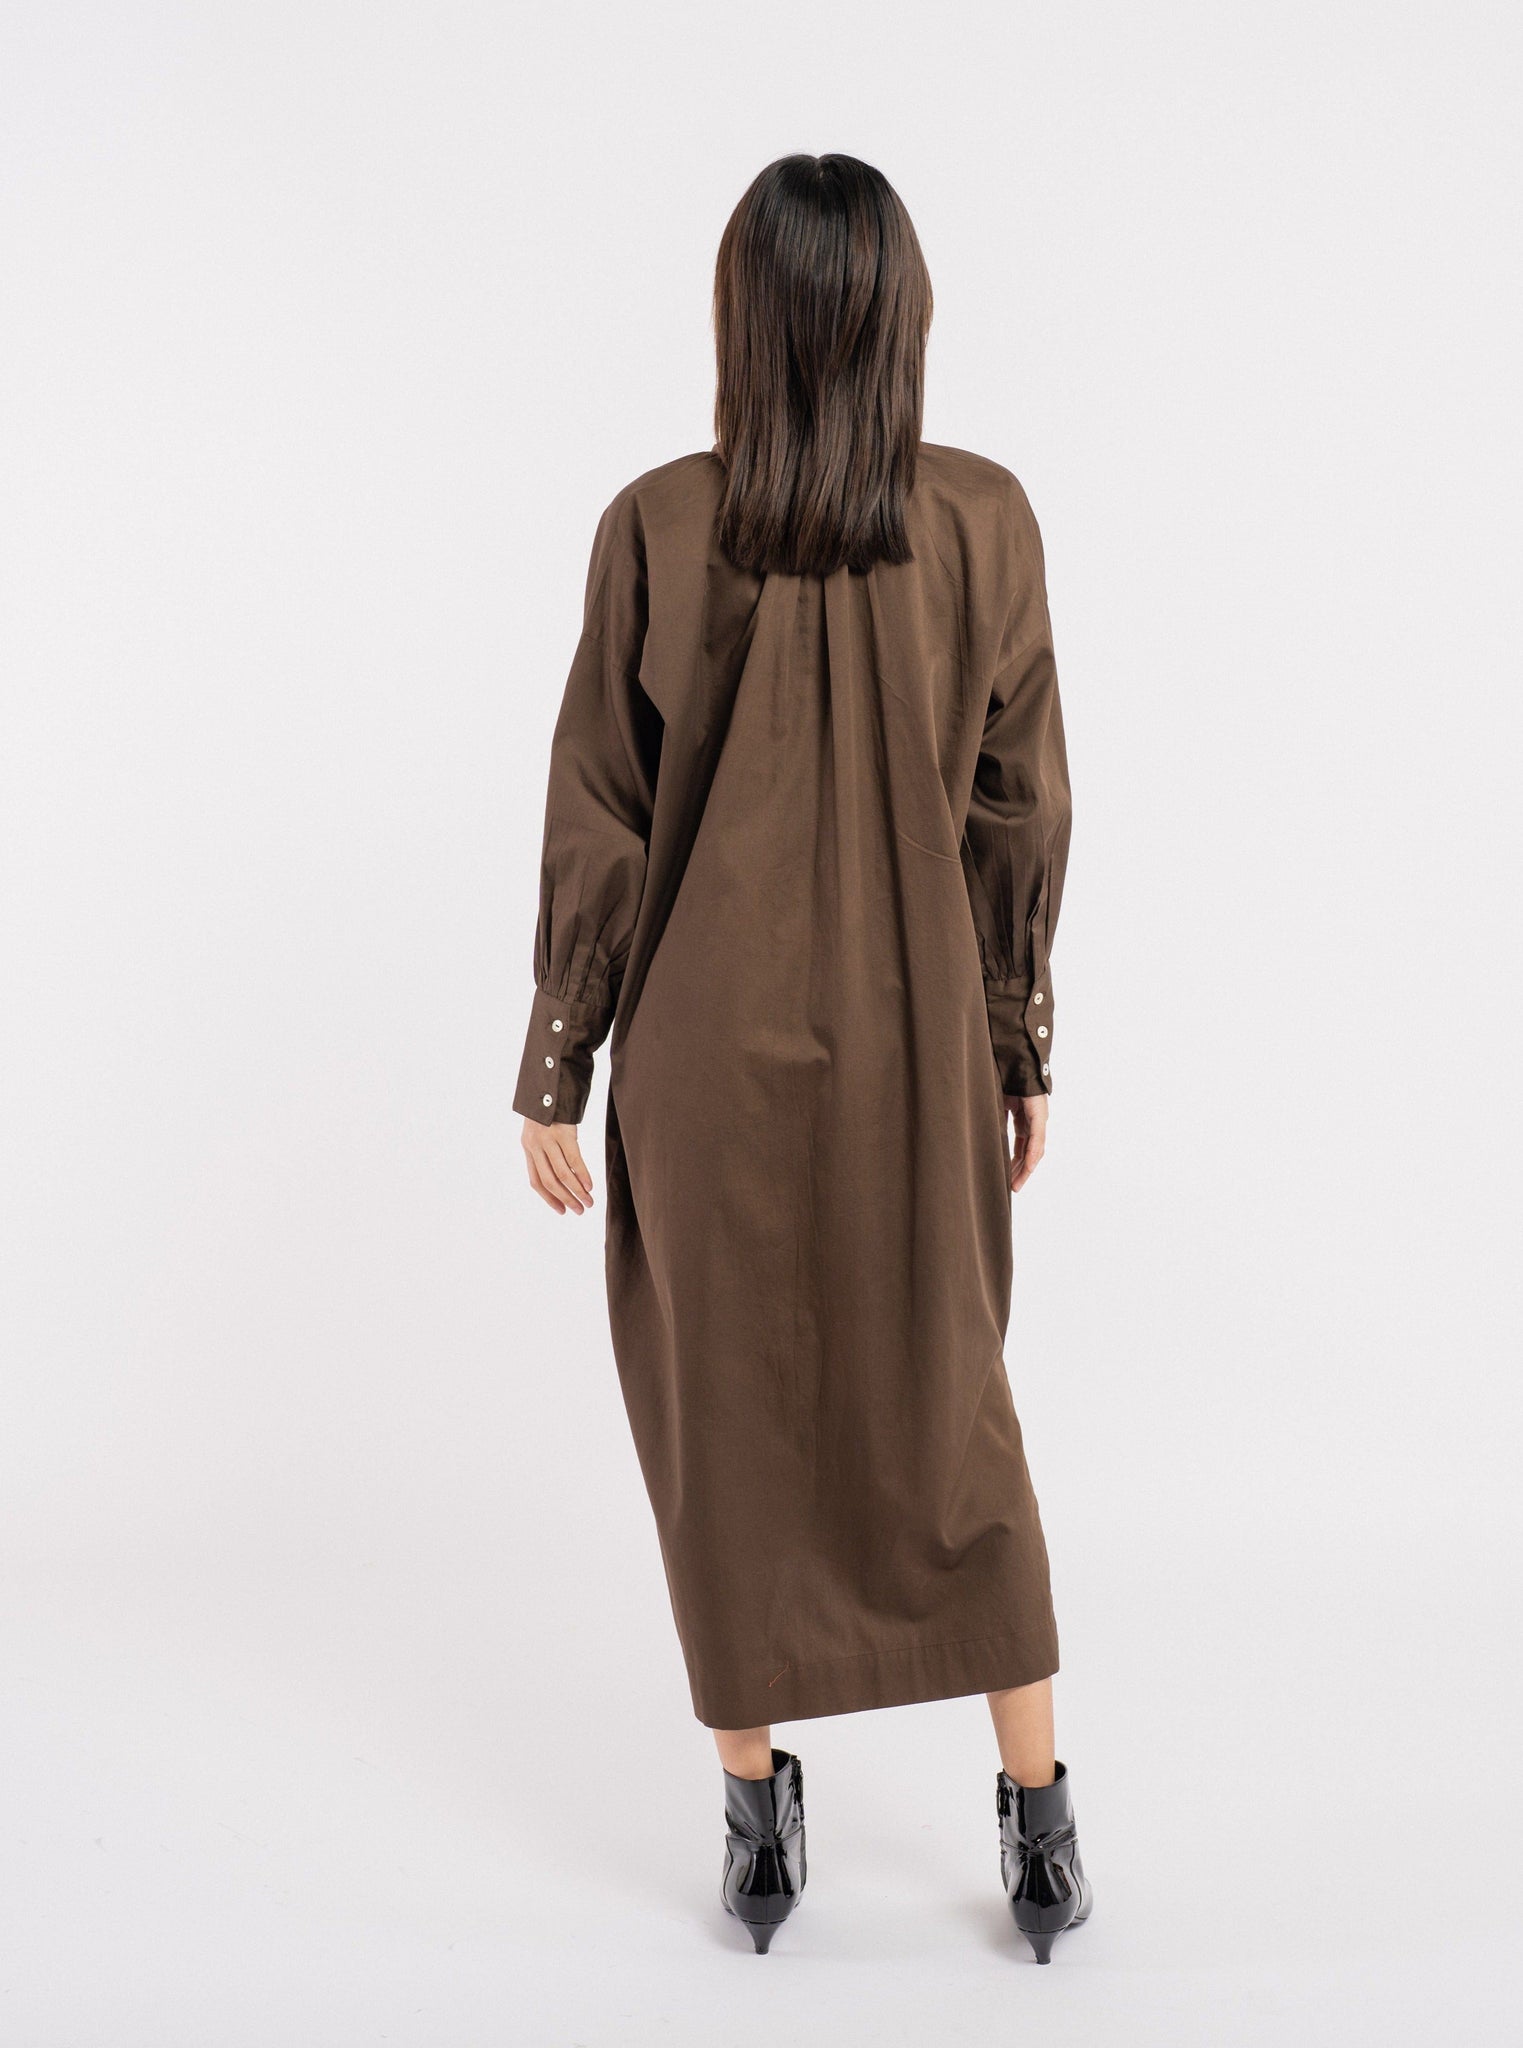 The Dolores Dress - Balsalt Brown - Sample is worn by a woman, made from organic cotton.